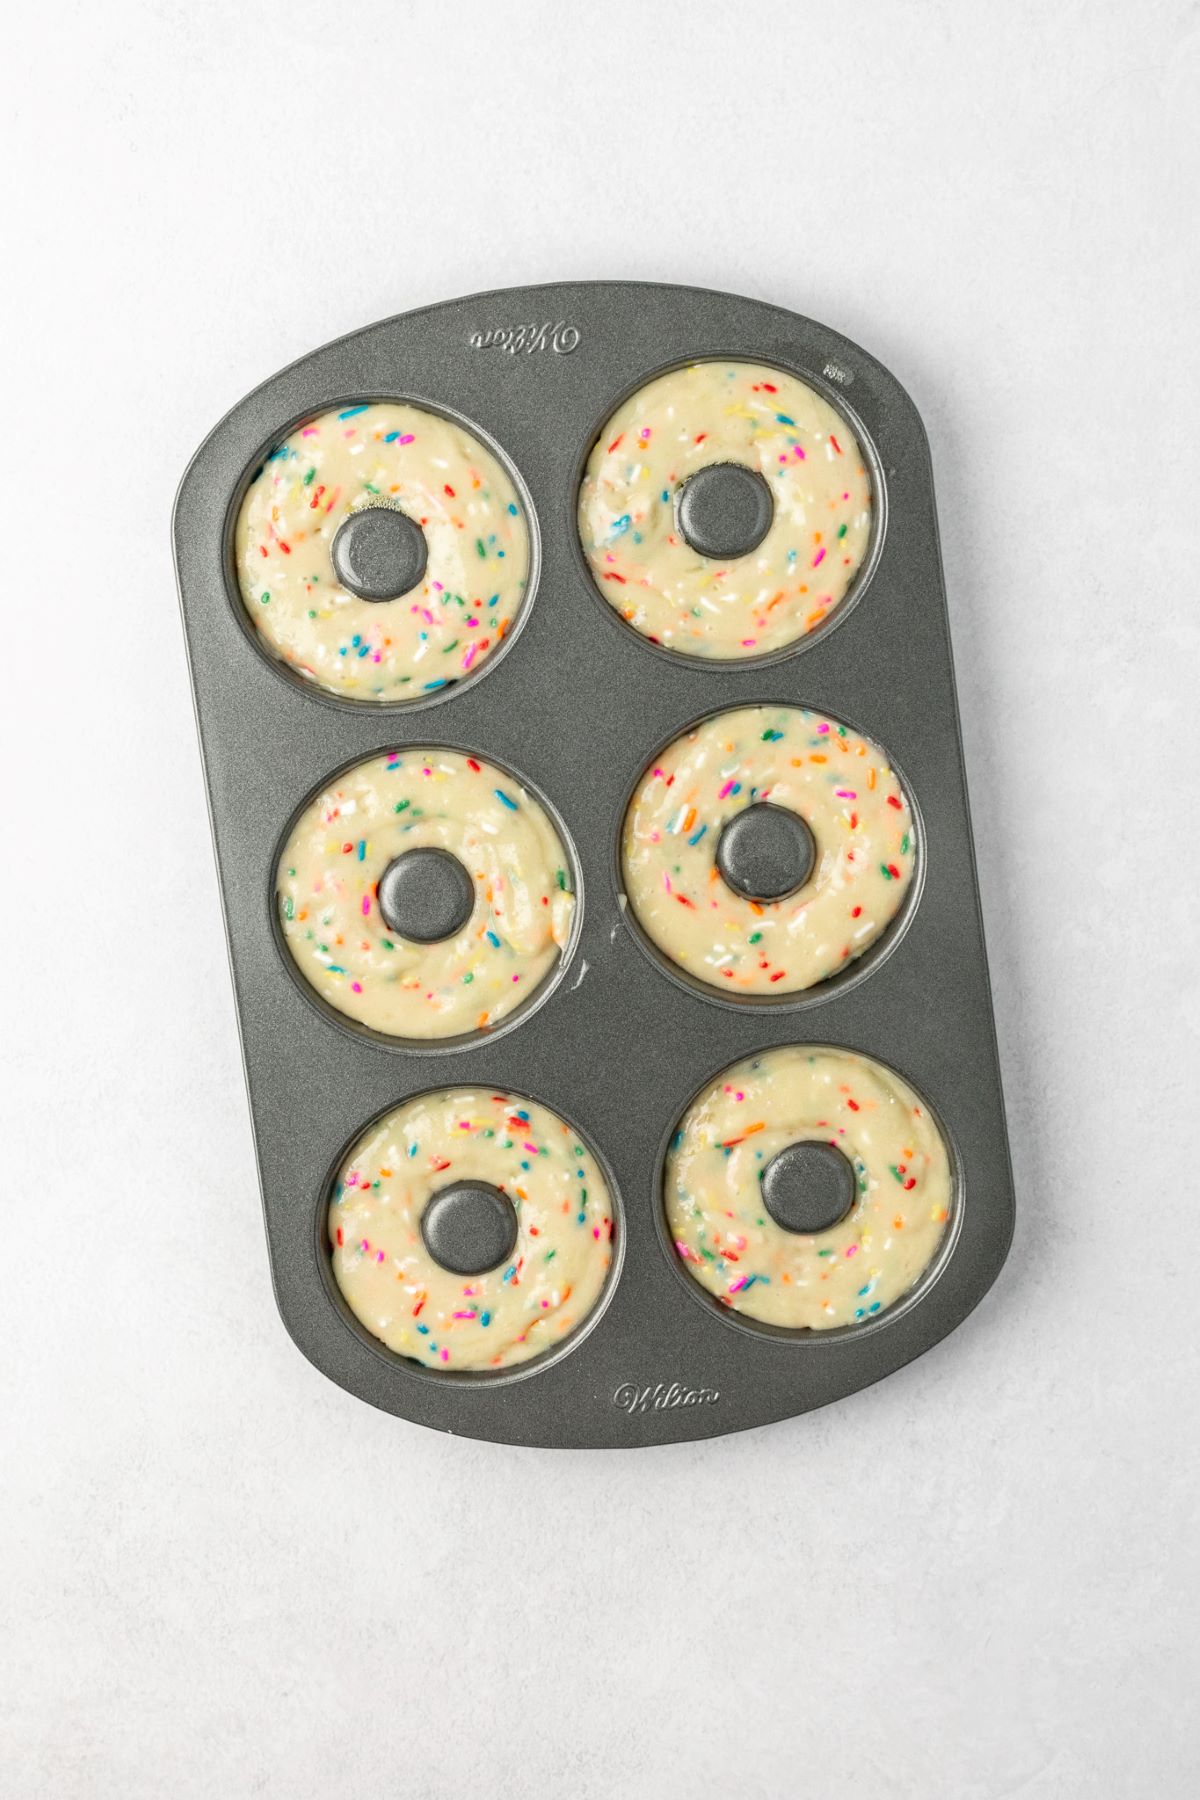 Donut pan with batter in each donut cup.